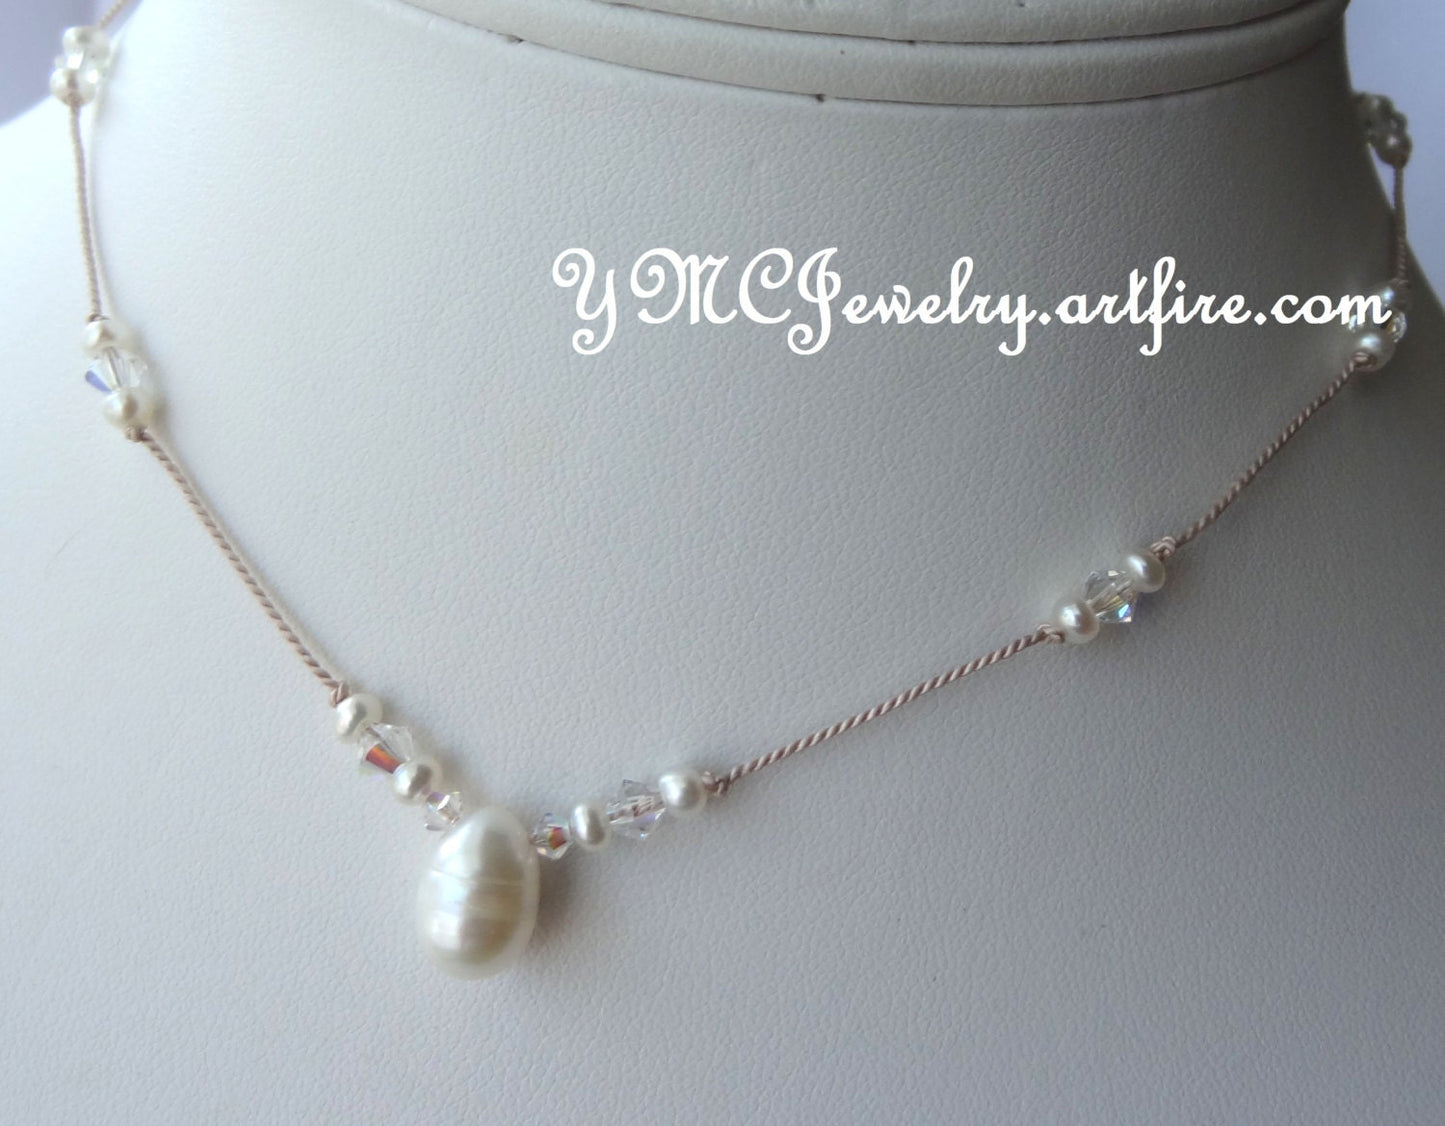 Real Freshwater Pearl Silk Cord Necklace,Freshwater Pearl Drop Necklace,Bridesmaid Cord Necklace,Junior Bridesmaid Gift,Flower Girl Necklace